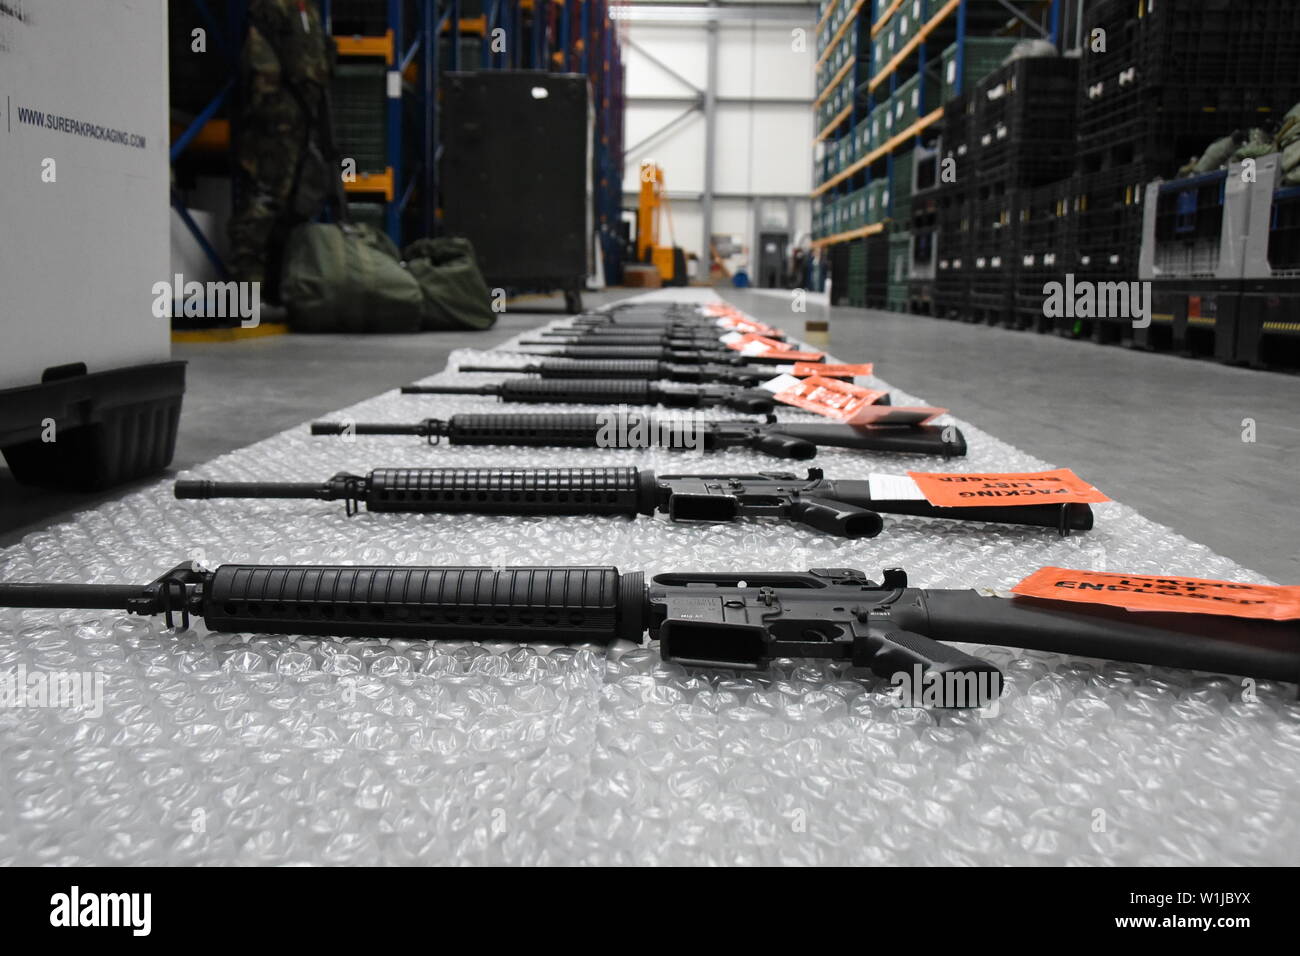 M16 rifles waiting to be inspected and shipped out June 6, 2019 at Ramstein Air Base, Germany. The rifles were packaged for shipping by Airmen from the 86th Logistics Readiness Squadron, and the Tennessee Air National Guard’s 118th LRS. (U.S. Air National Guard photo by Tech. Sgt. Mark Thompson) Stock Photo